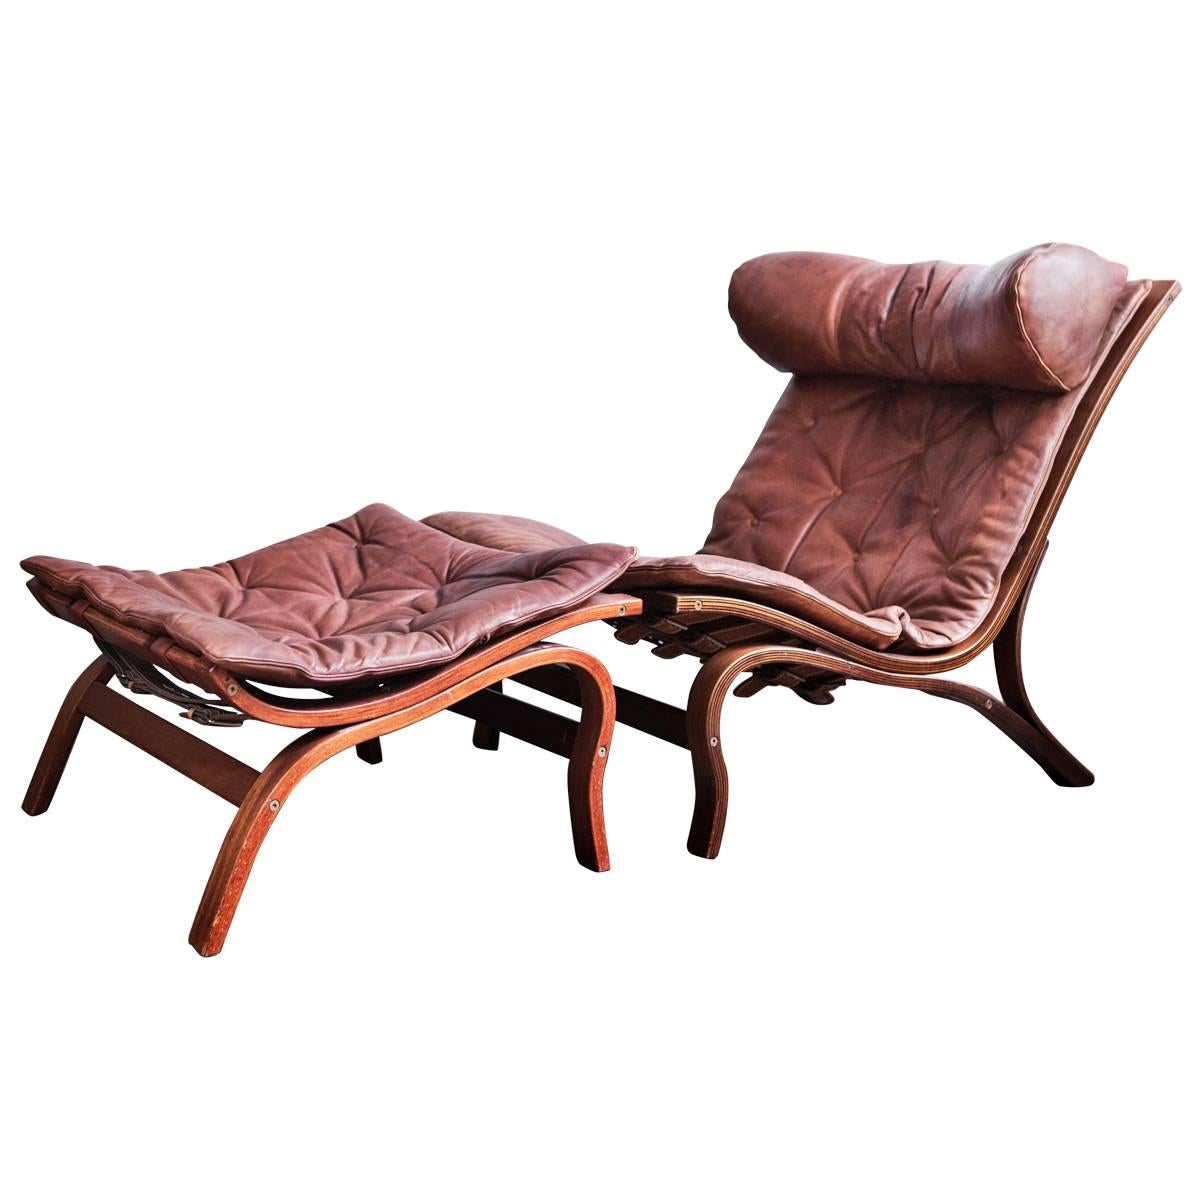 Arne Norell "Skandi" Lounge Chair with Ottoman